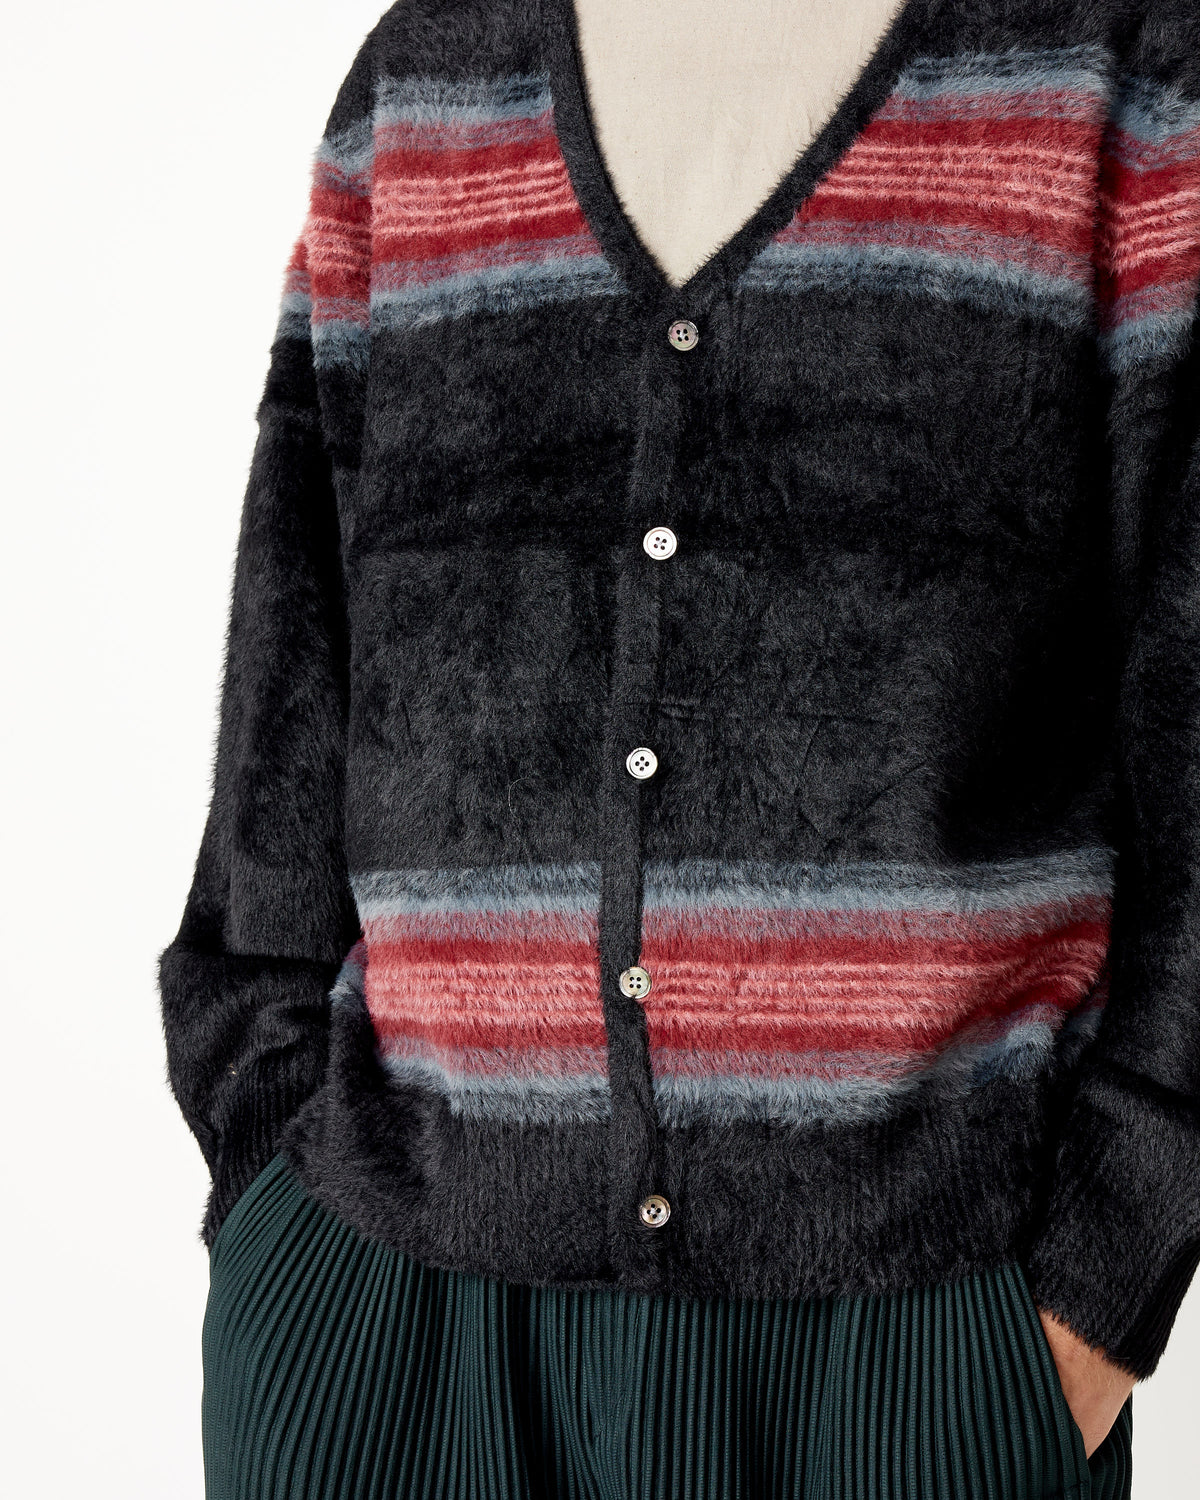 Shaggy Cardigan Stussy Find the top bargains and savings